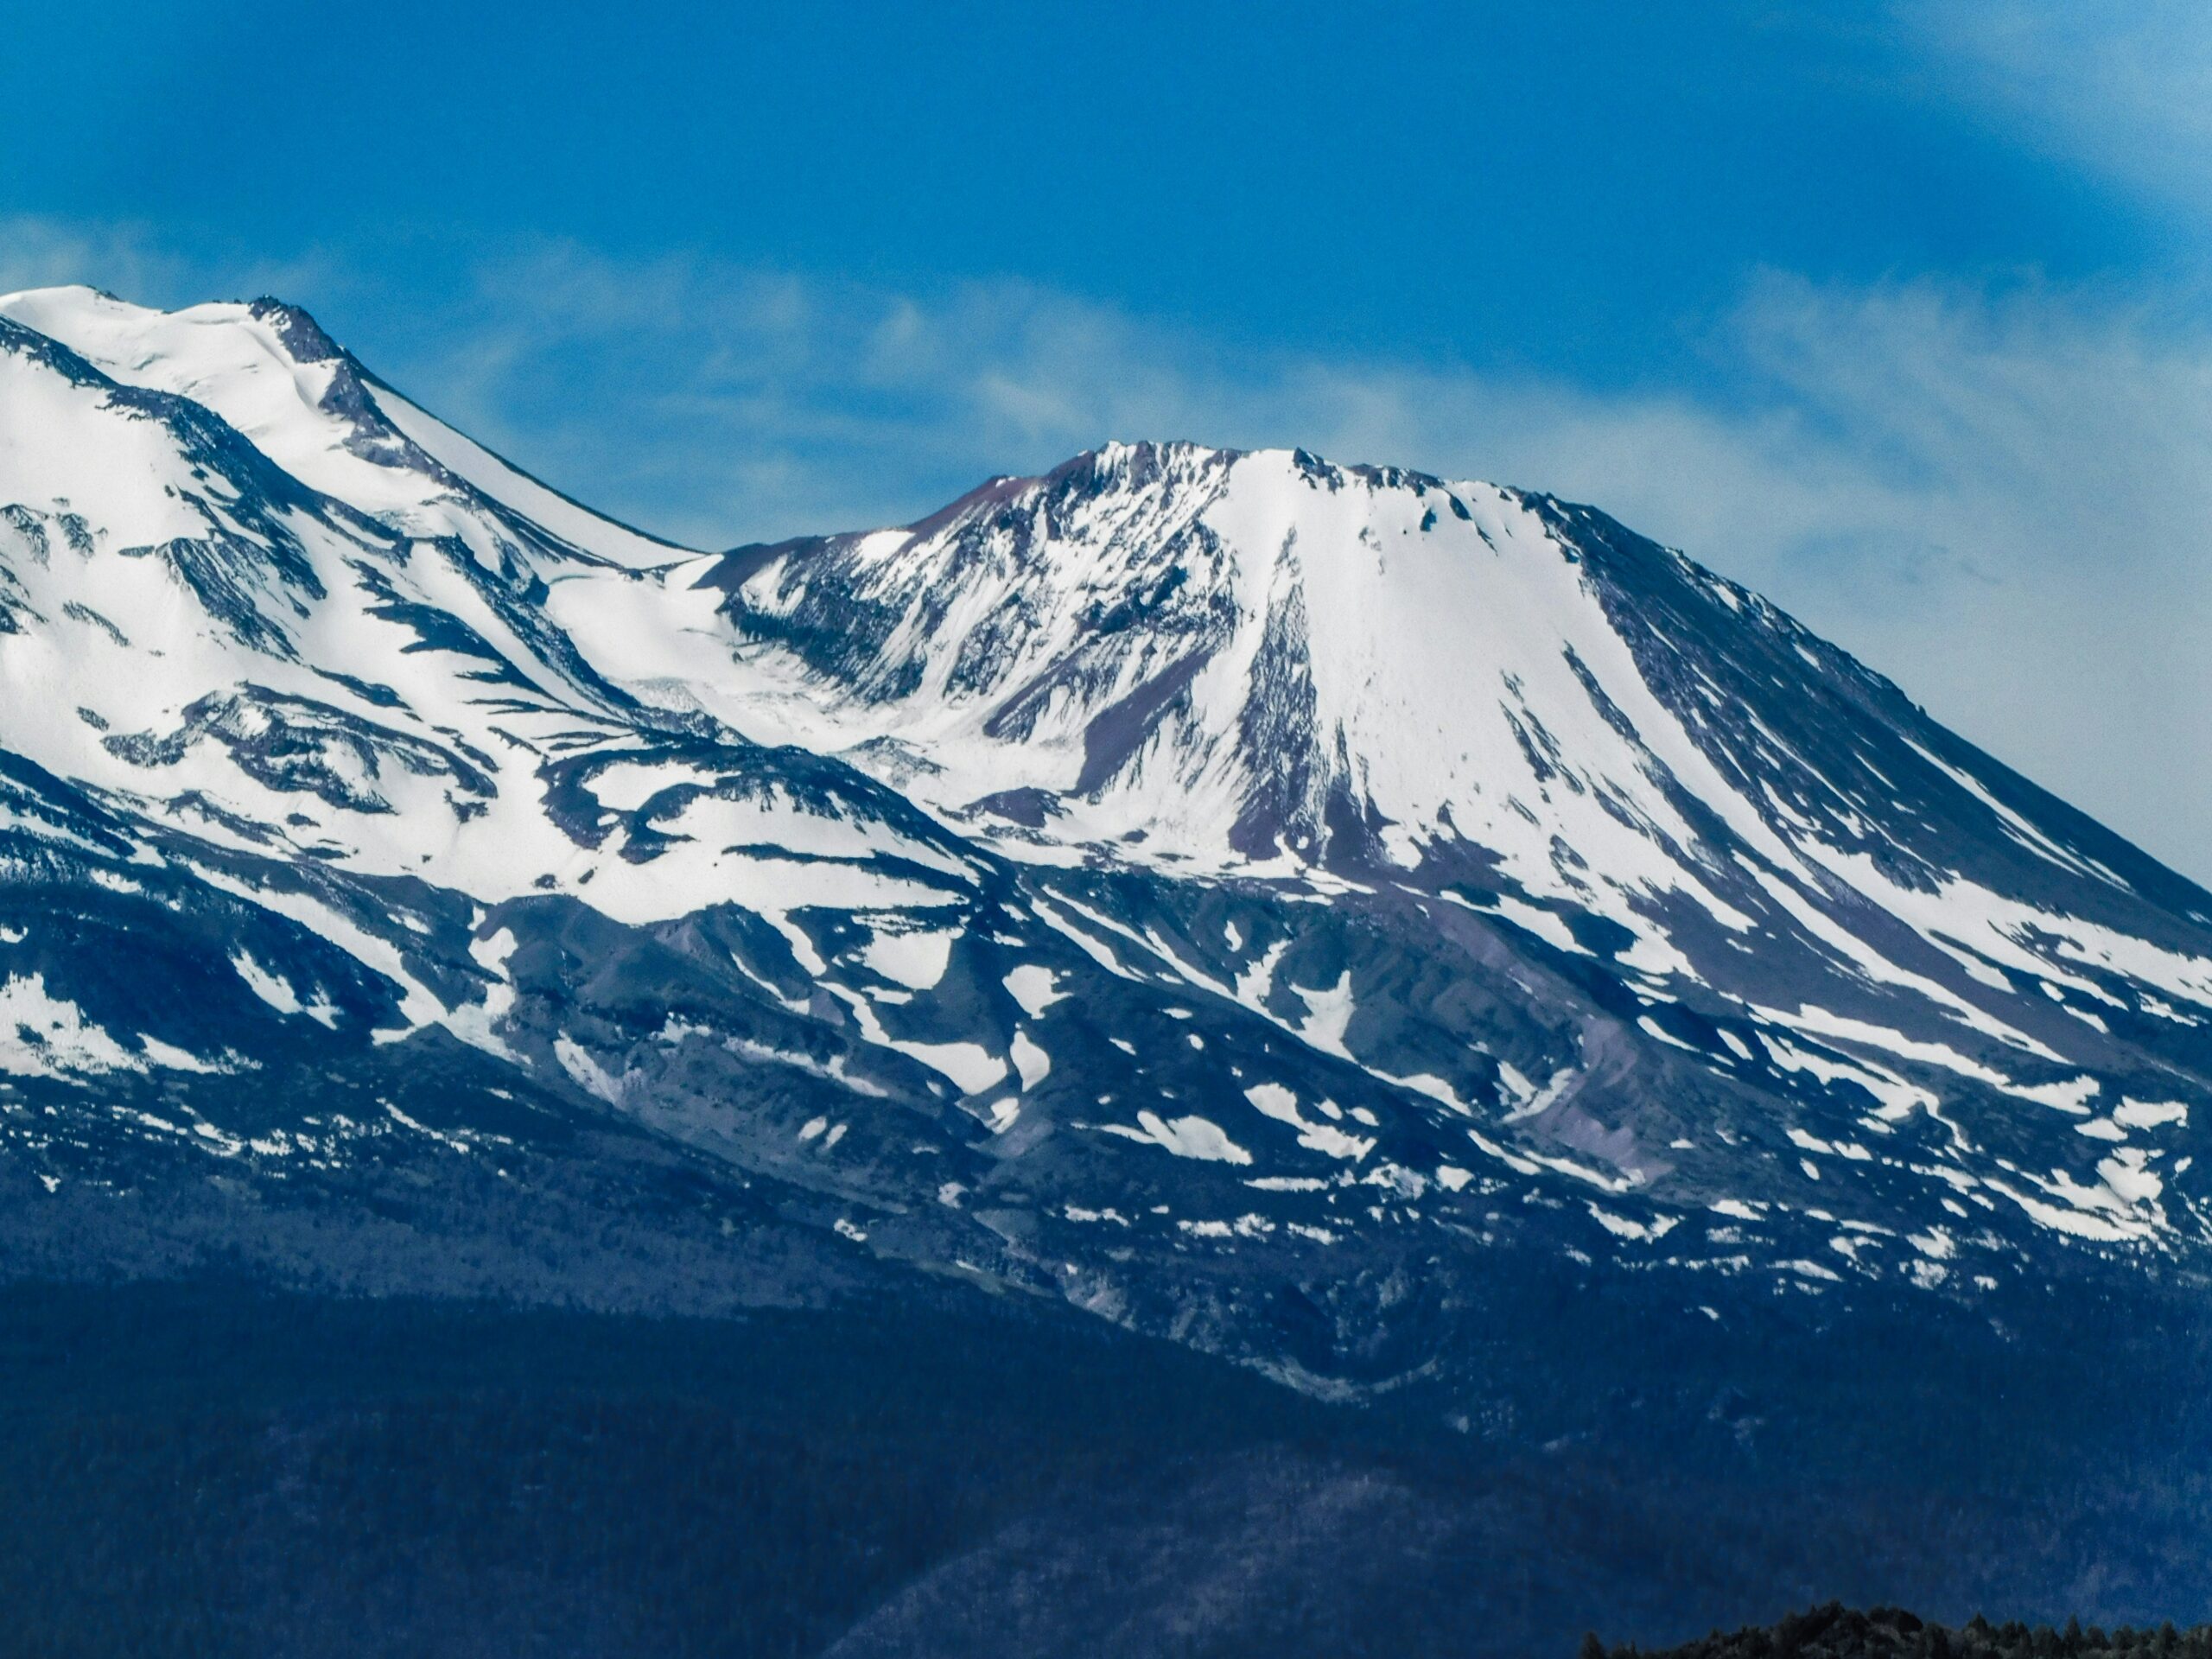 Has Anyone Died While Attempting To Climb Mount Shasta?